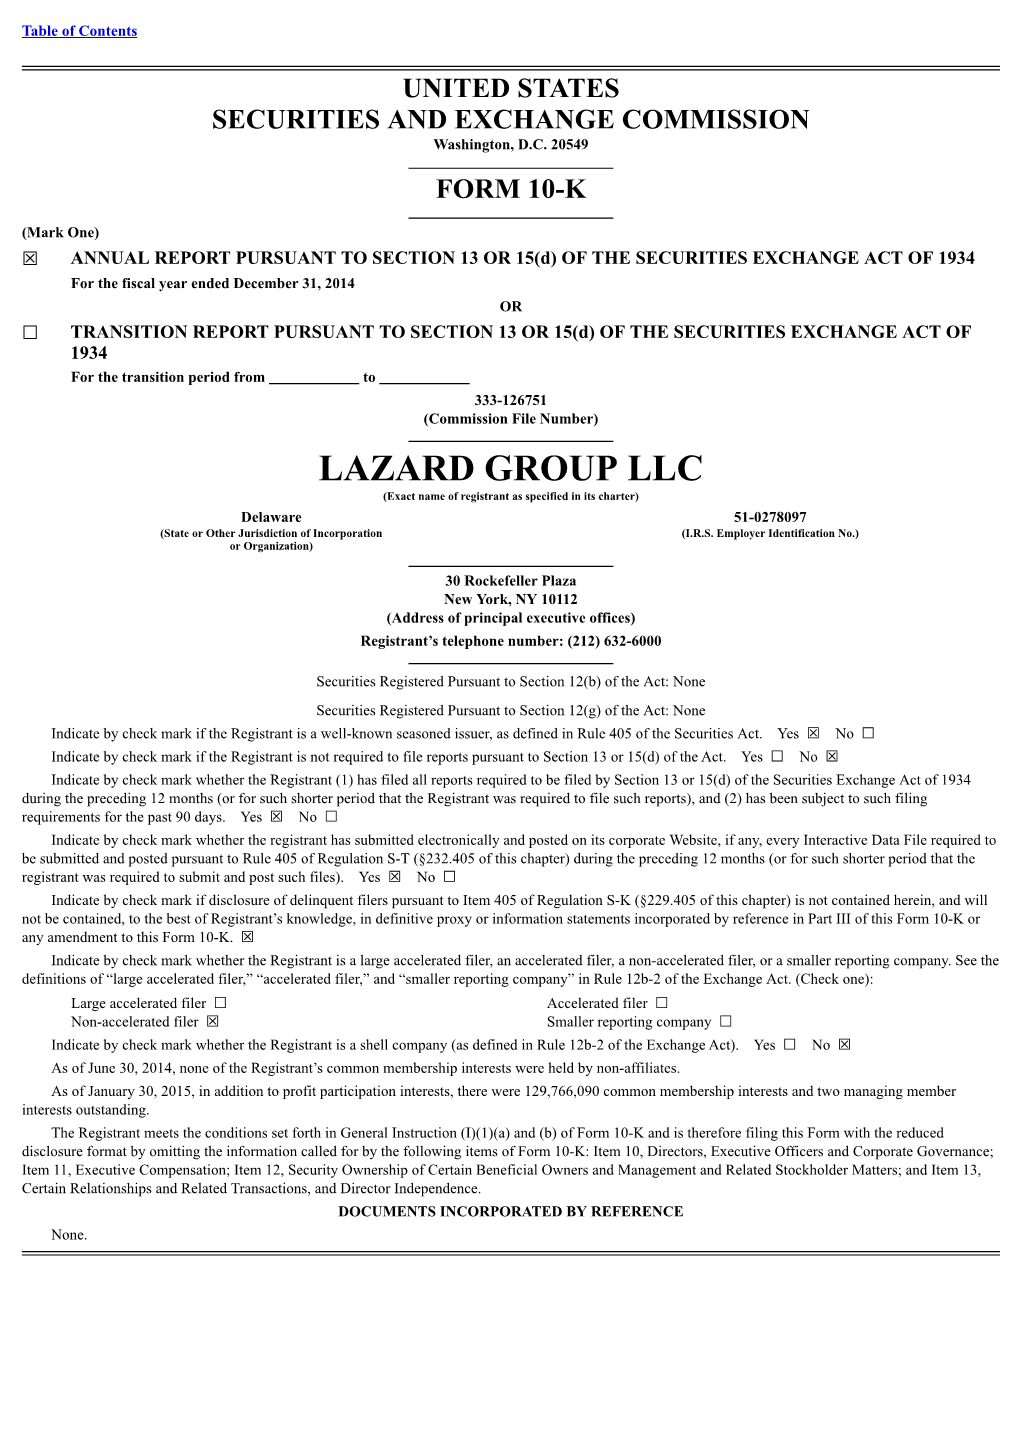 LAZARD GROUP LLC (Exact Name of Registrant As Specified in Its Charter)